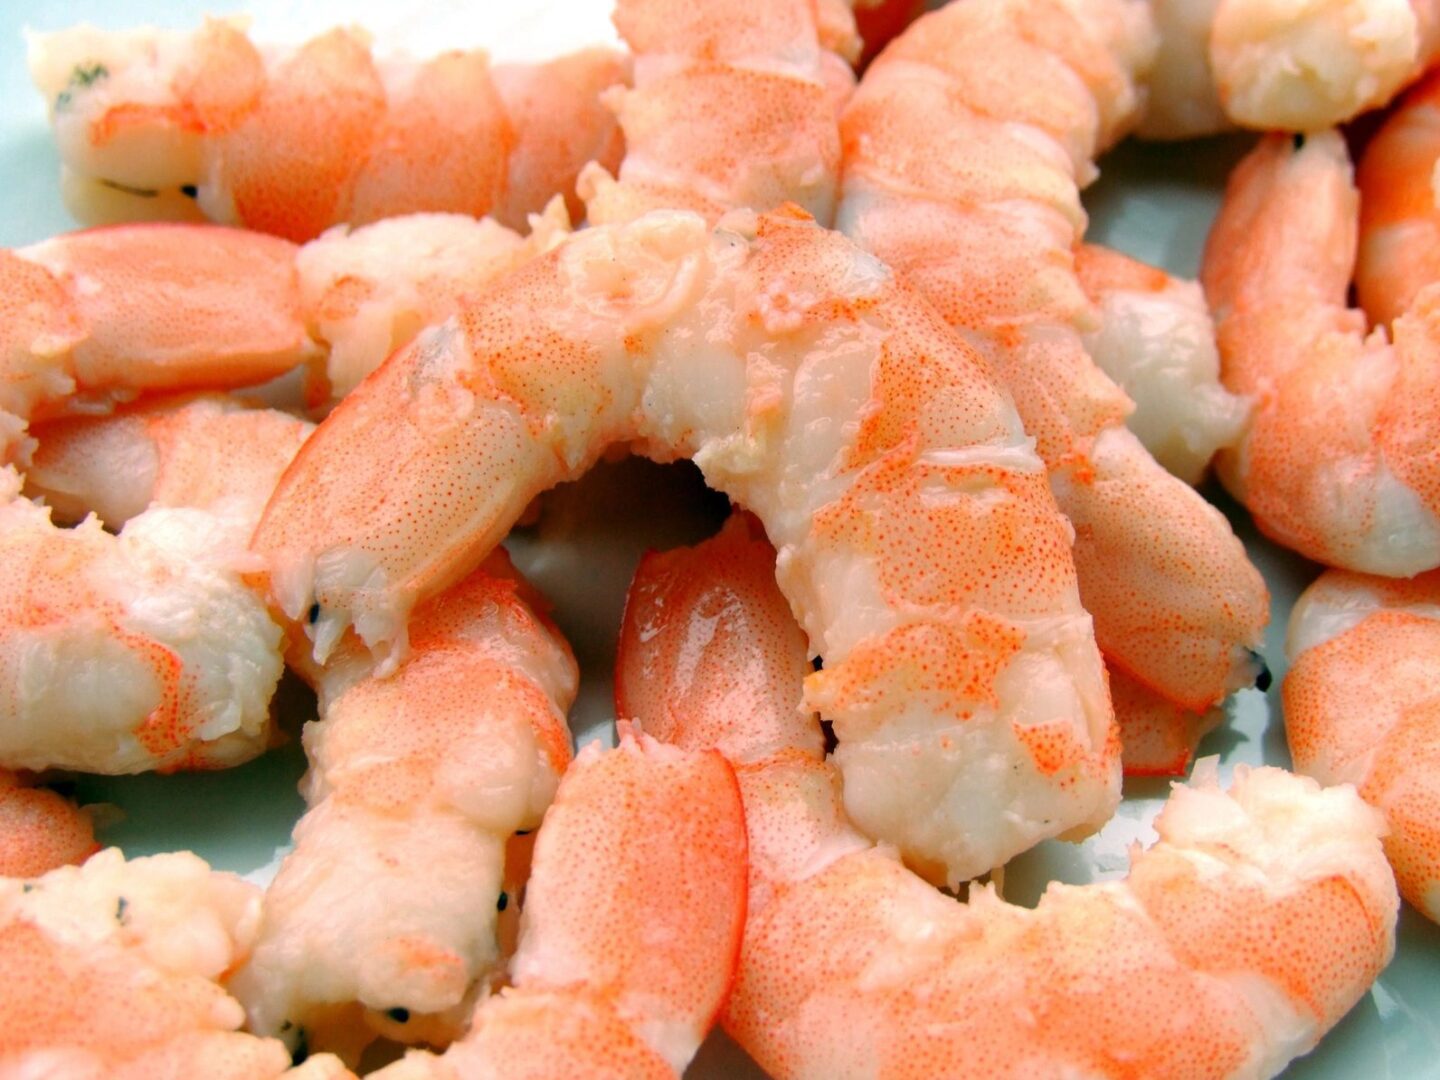 A close up of some shrimp on the plate